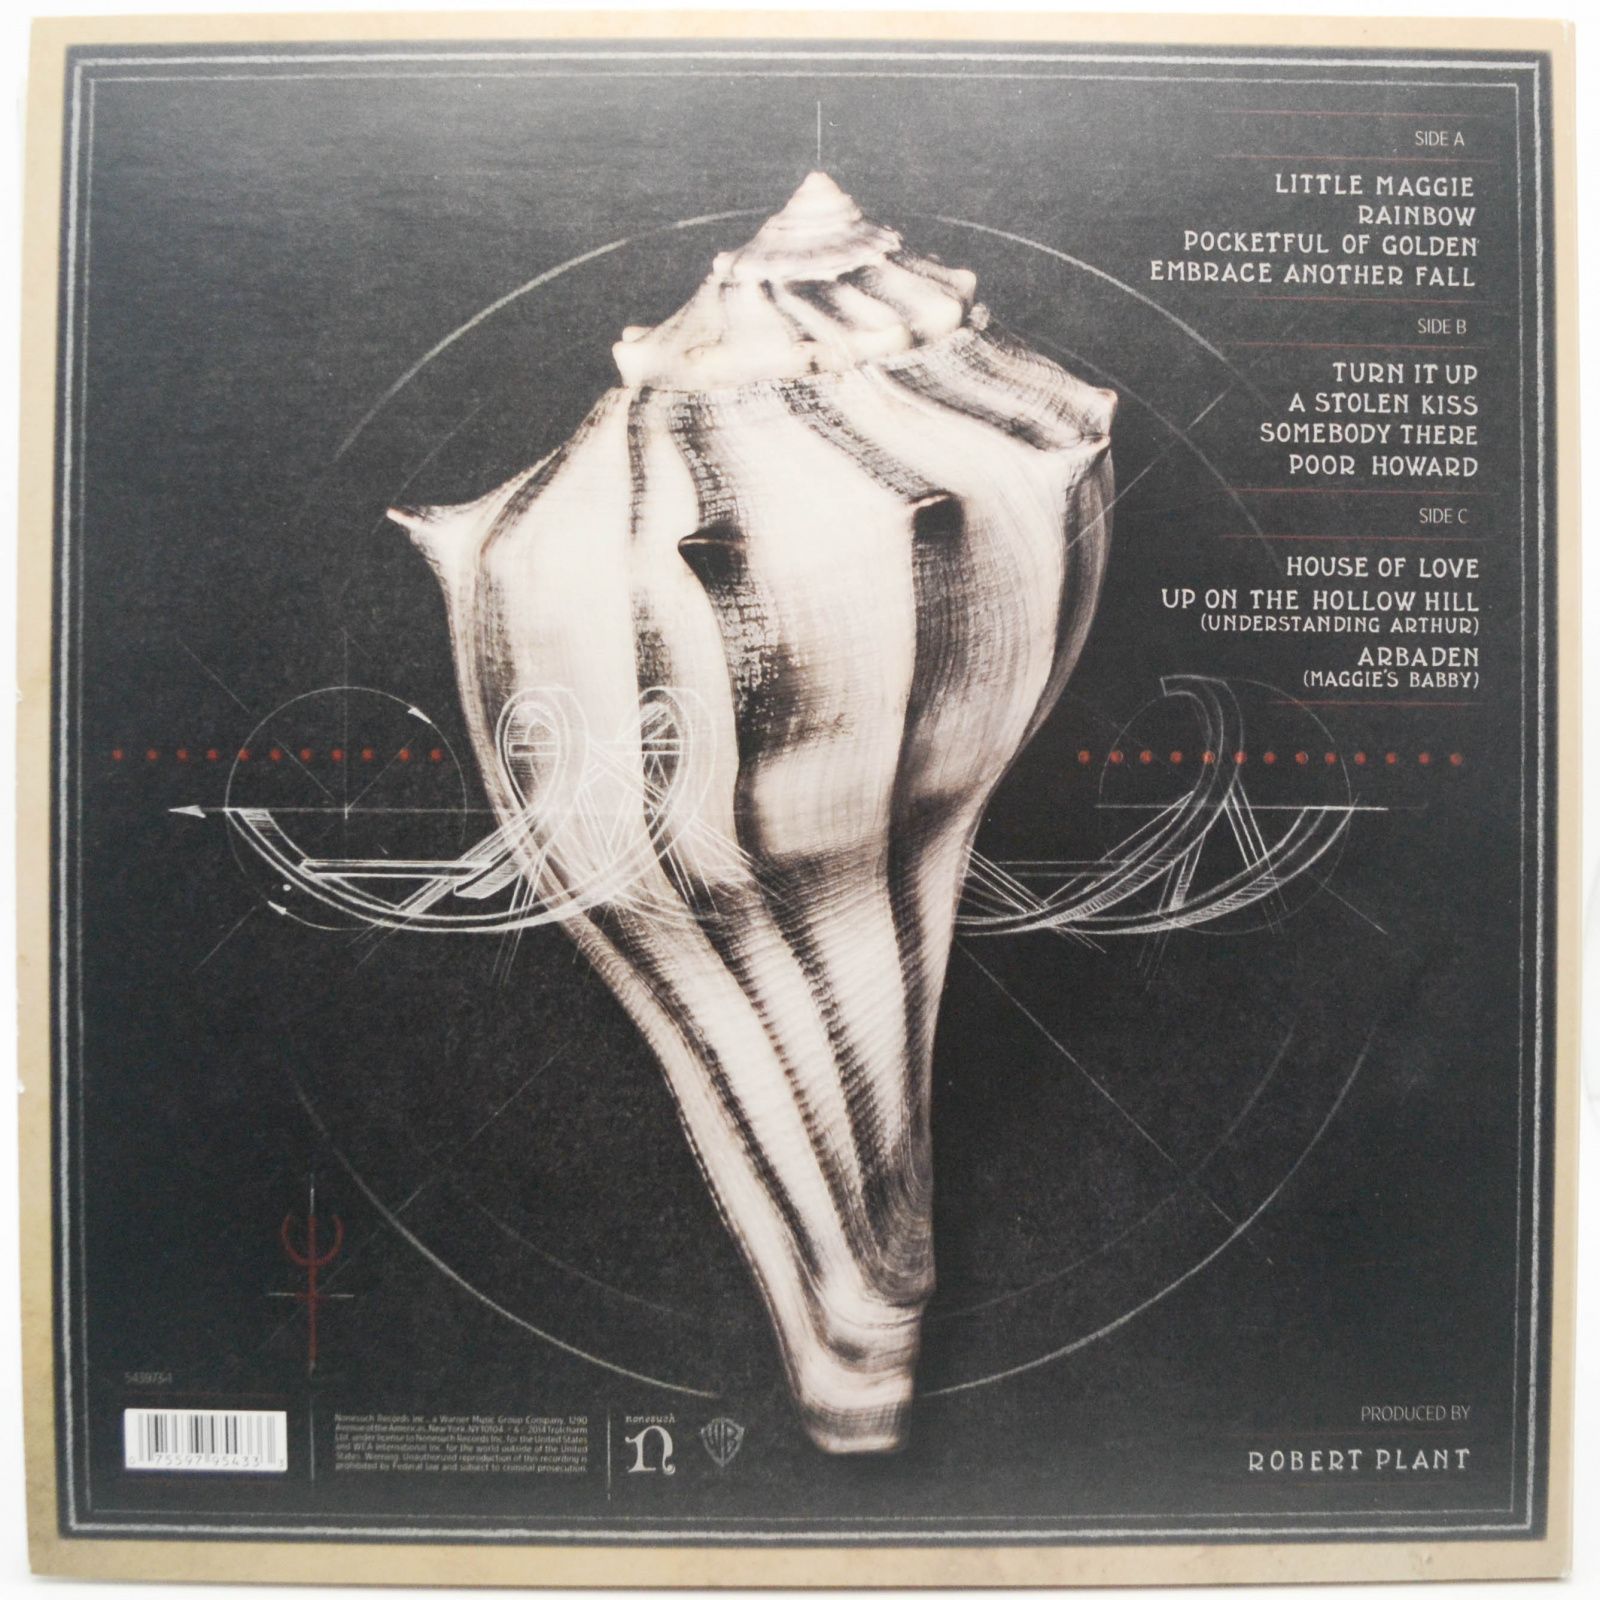 Robert Plant And The Sensational Space Shifters — Lullaby And... The Ceaseless Roar (2LP), 2014